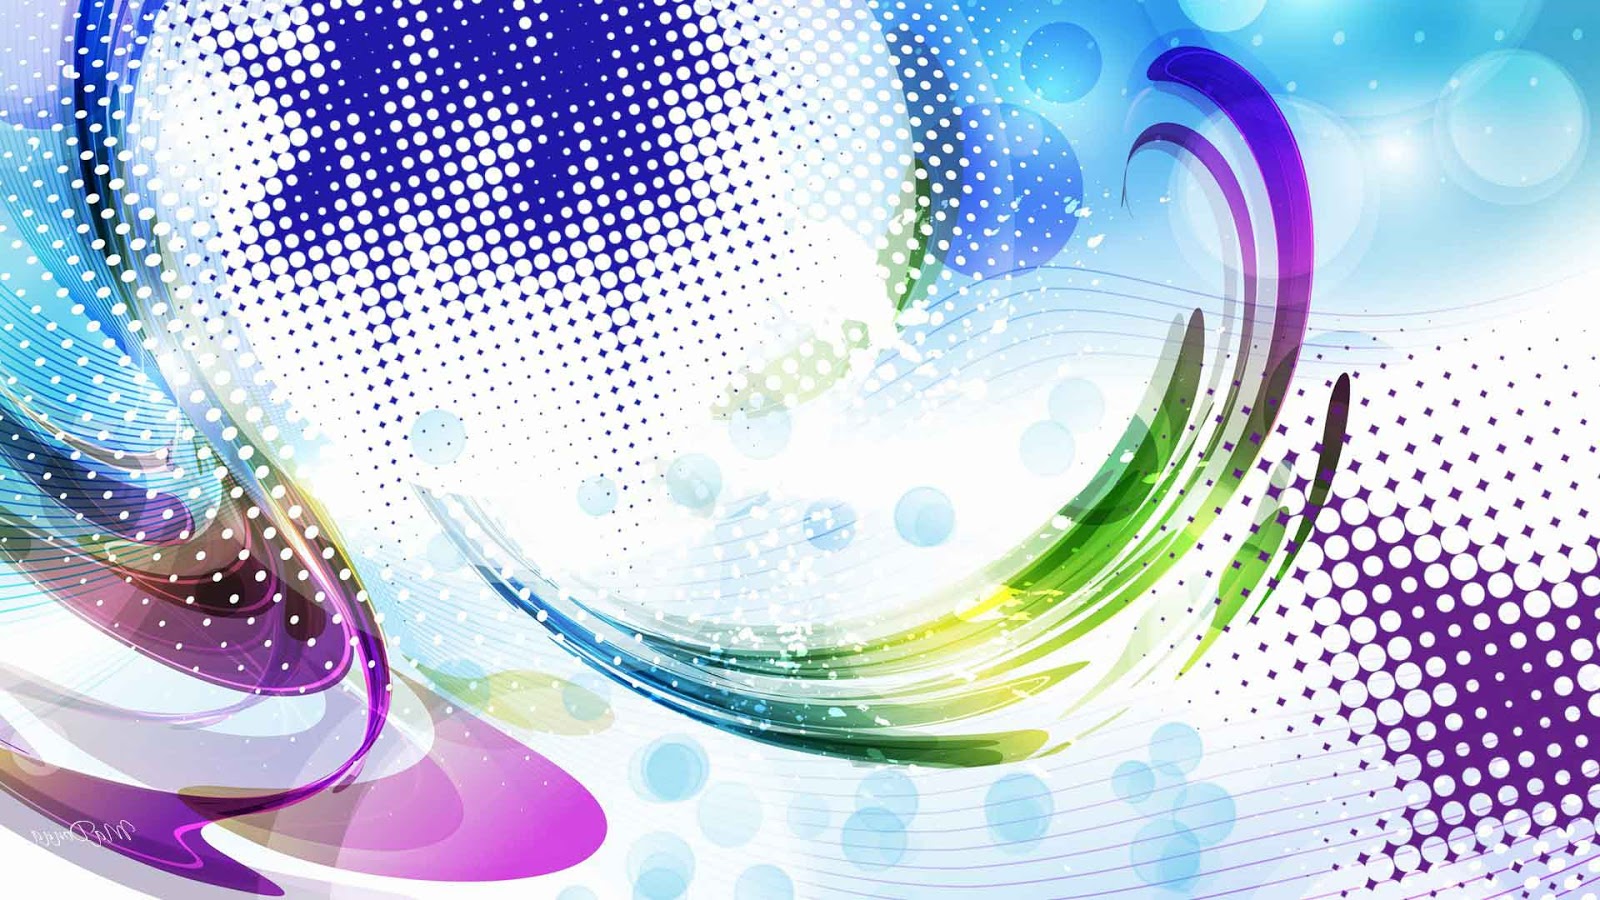 Latest Abstract Backgrounds Wallpapers 2013 | Download Wallpaper